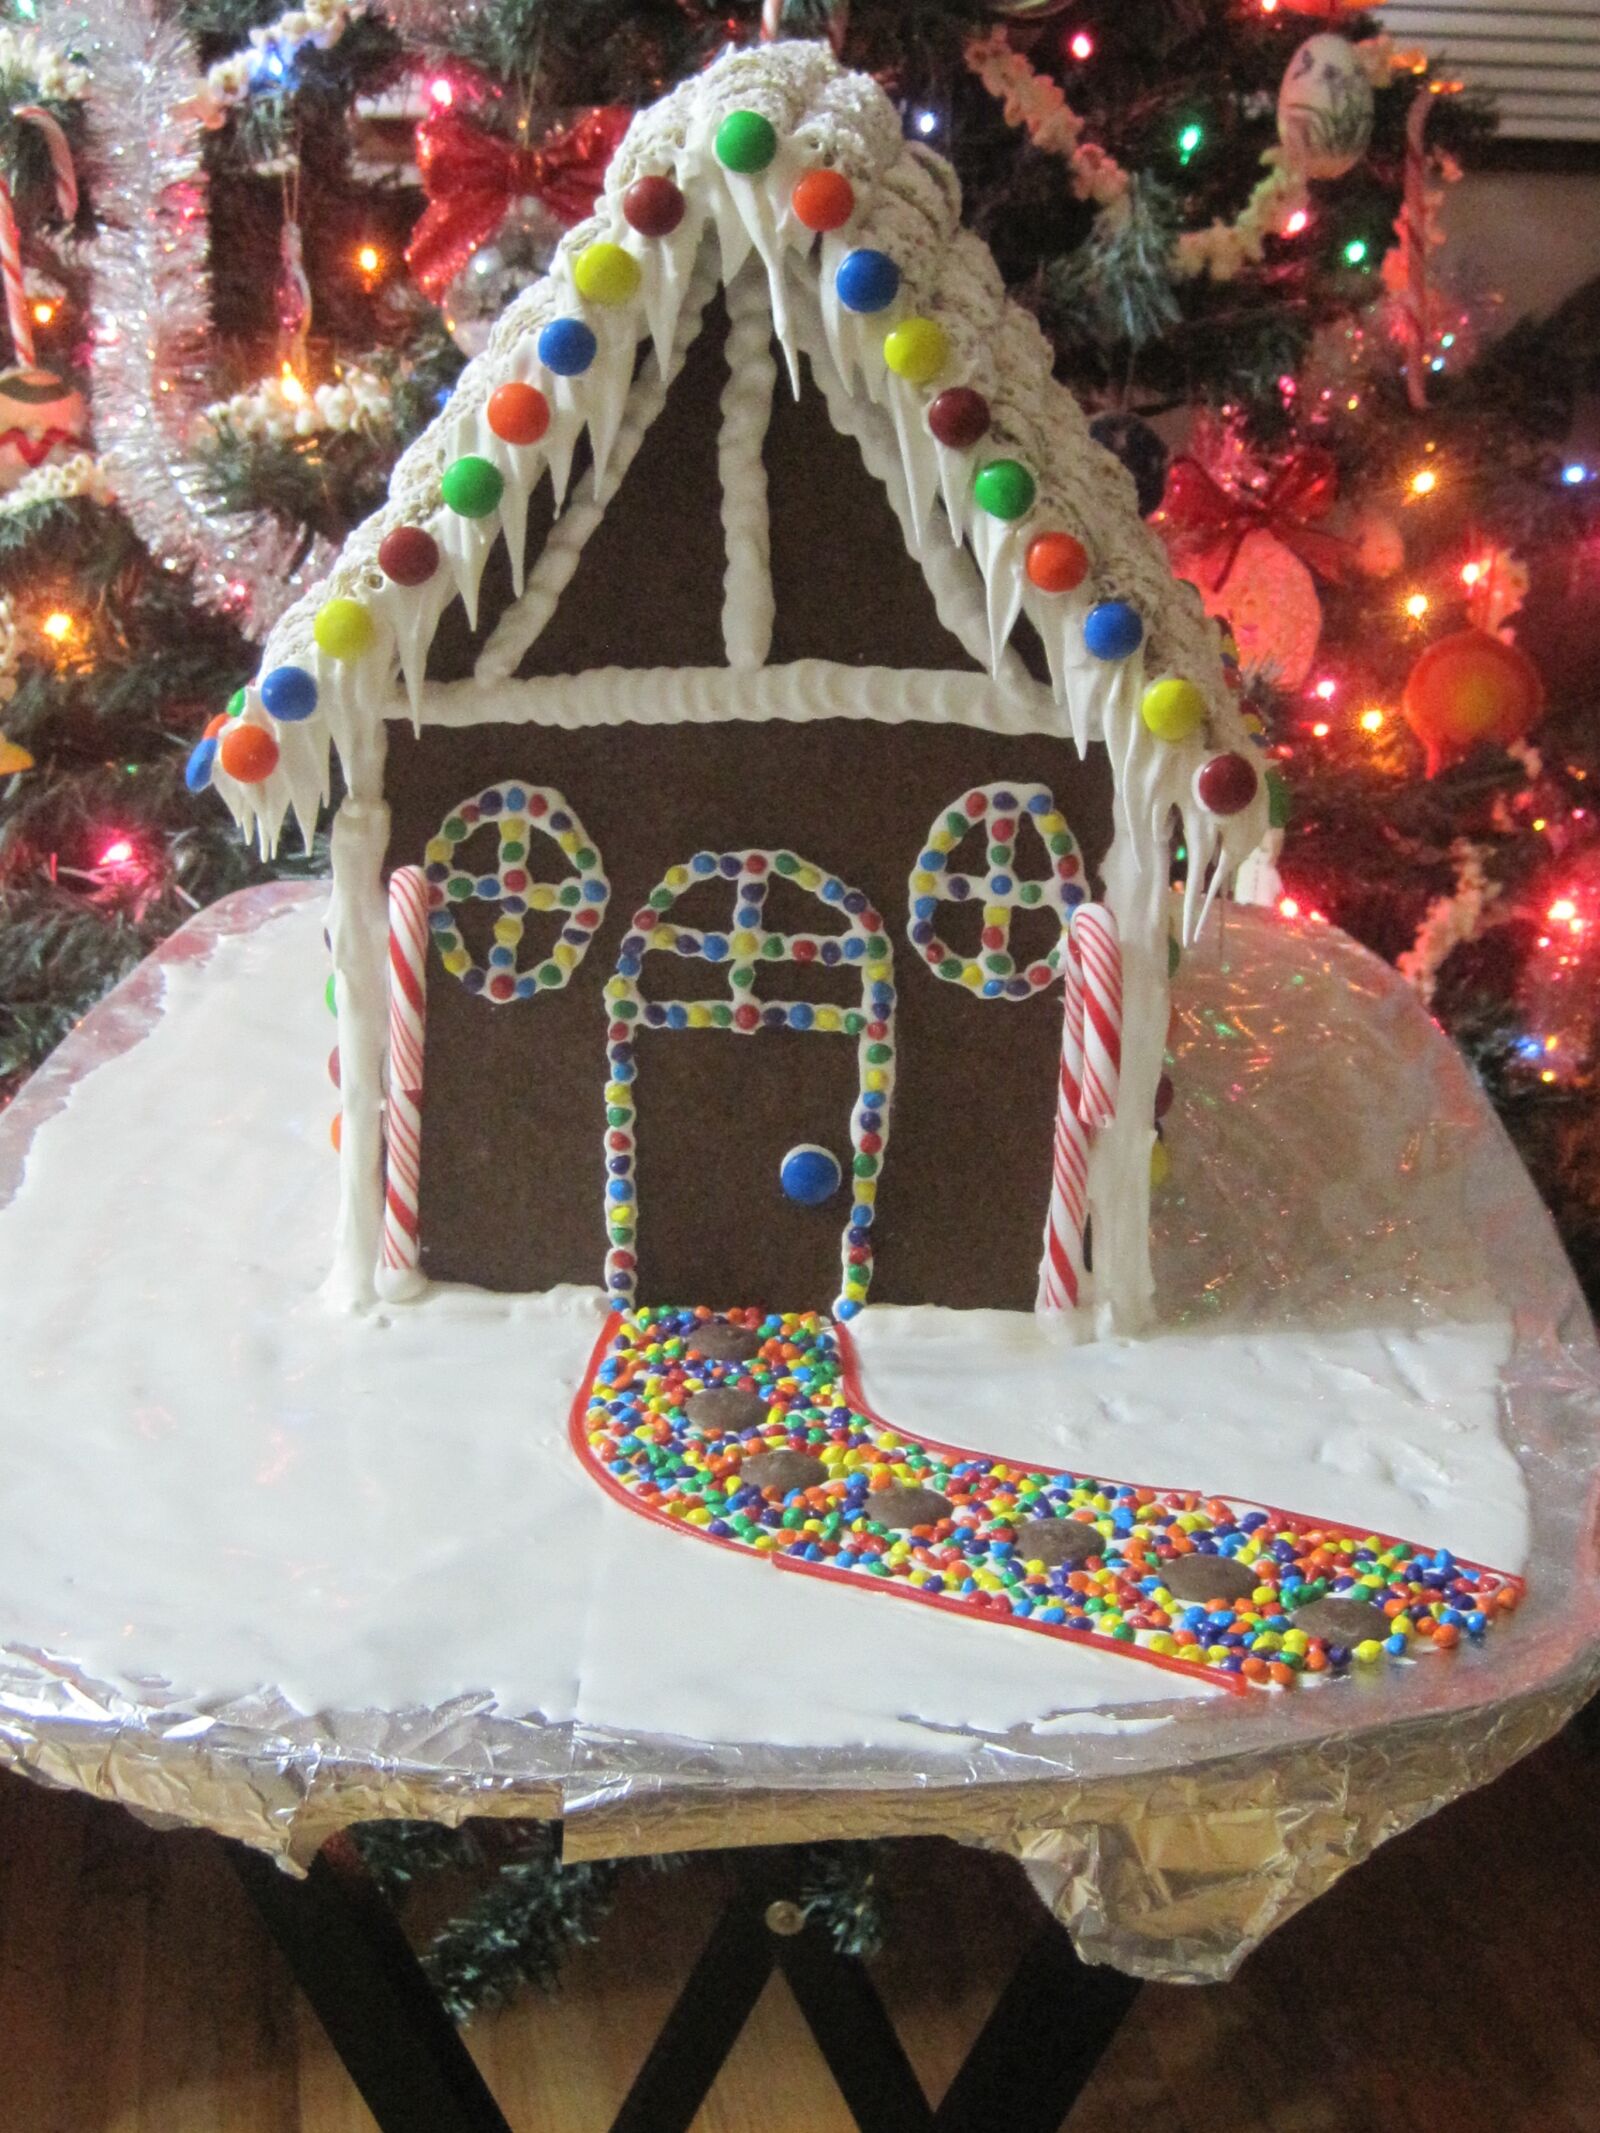 Canon PowerShot SD1200 IS (Digital IXUS 95 IS / IXY Digital 110 IS) sample photo. Christmas, gingerbread house, craft photography